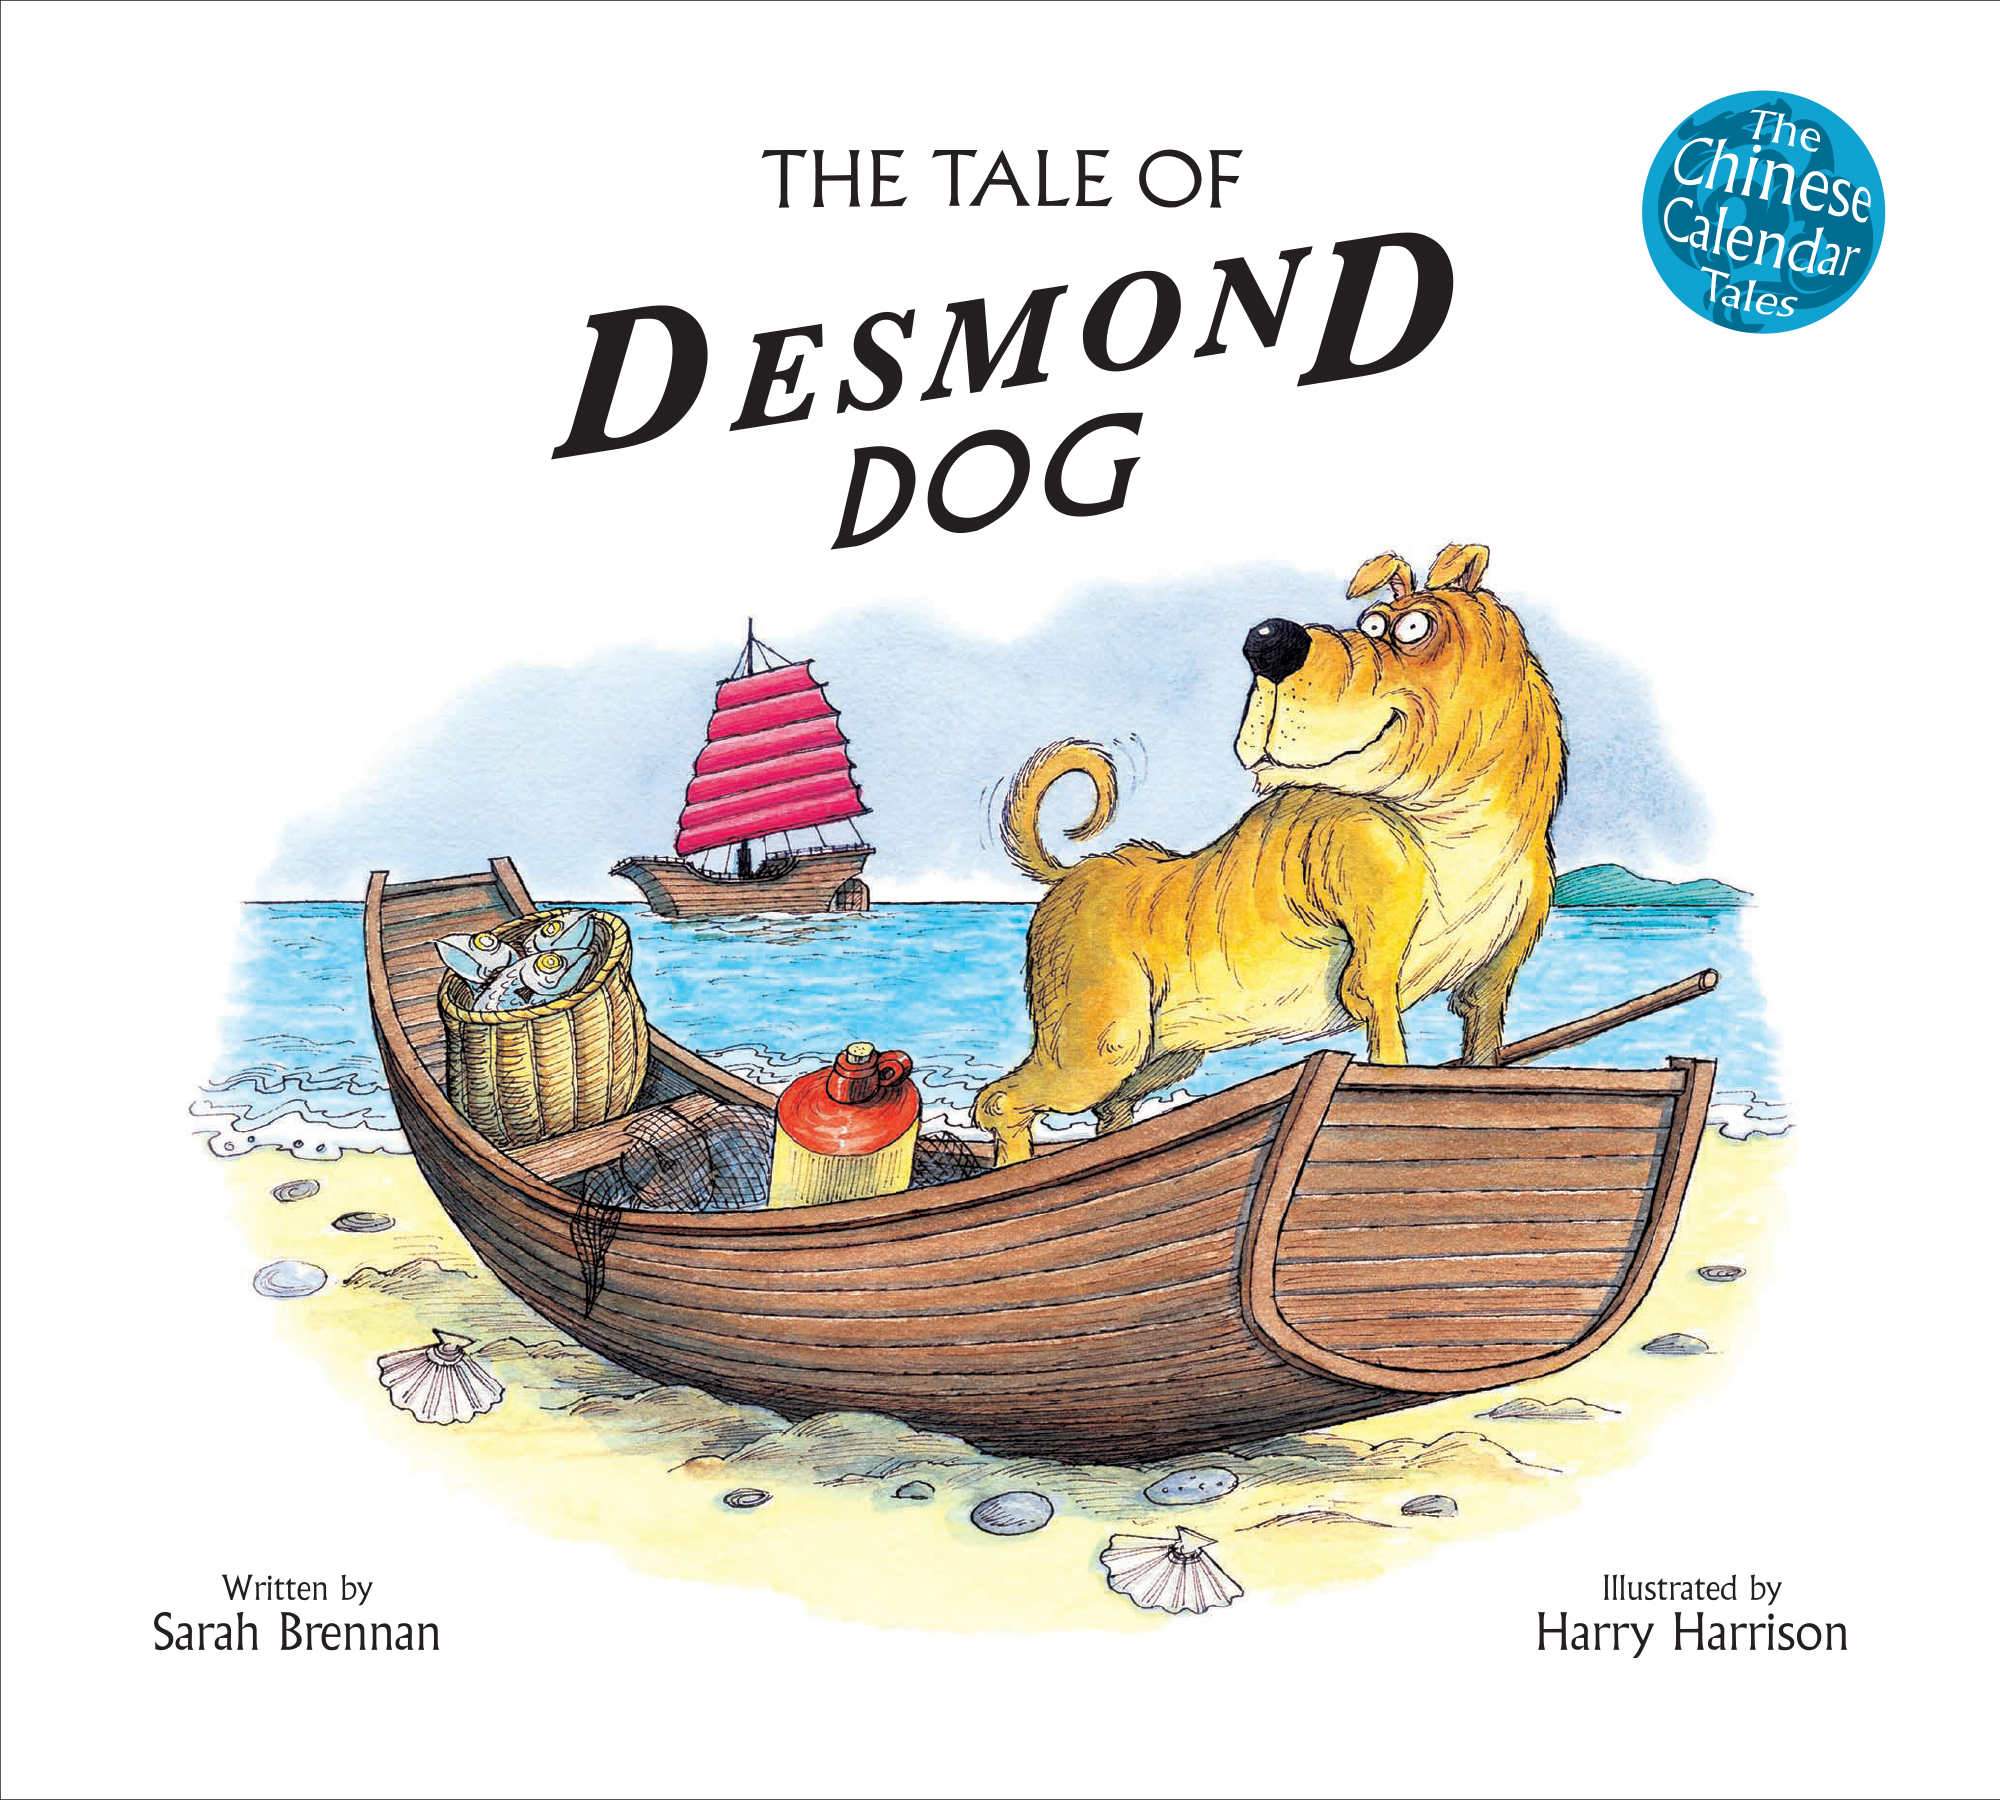 The Tale of Desmond Dog